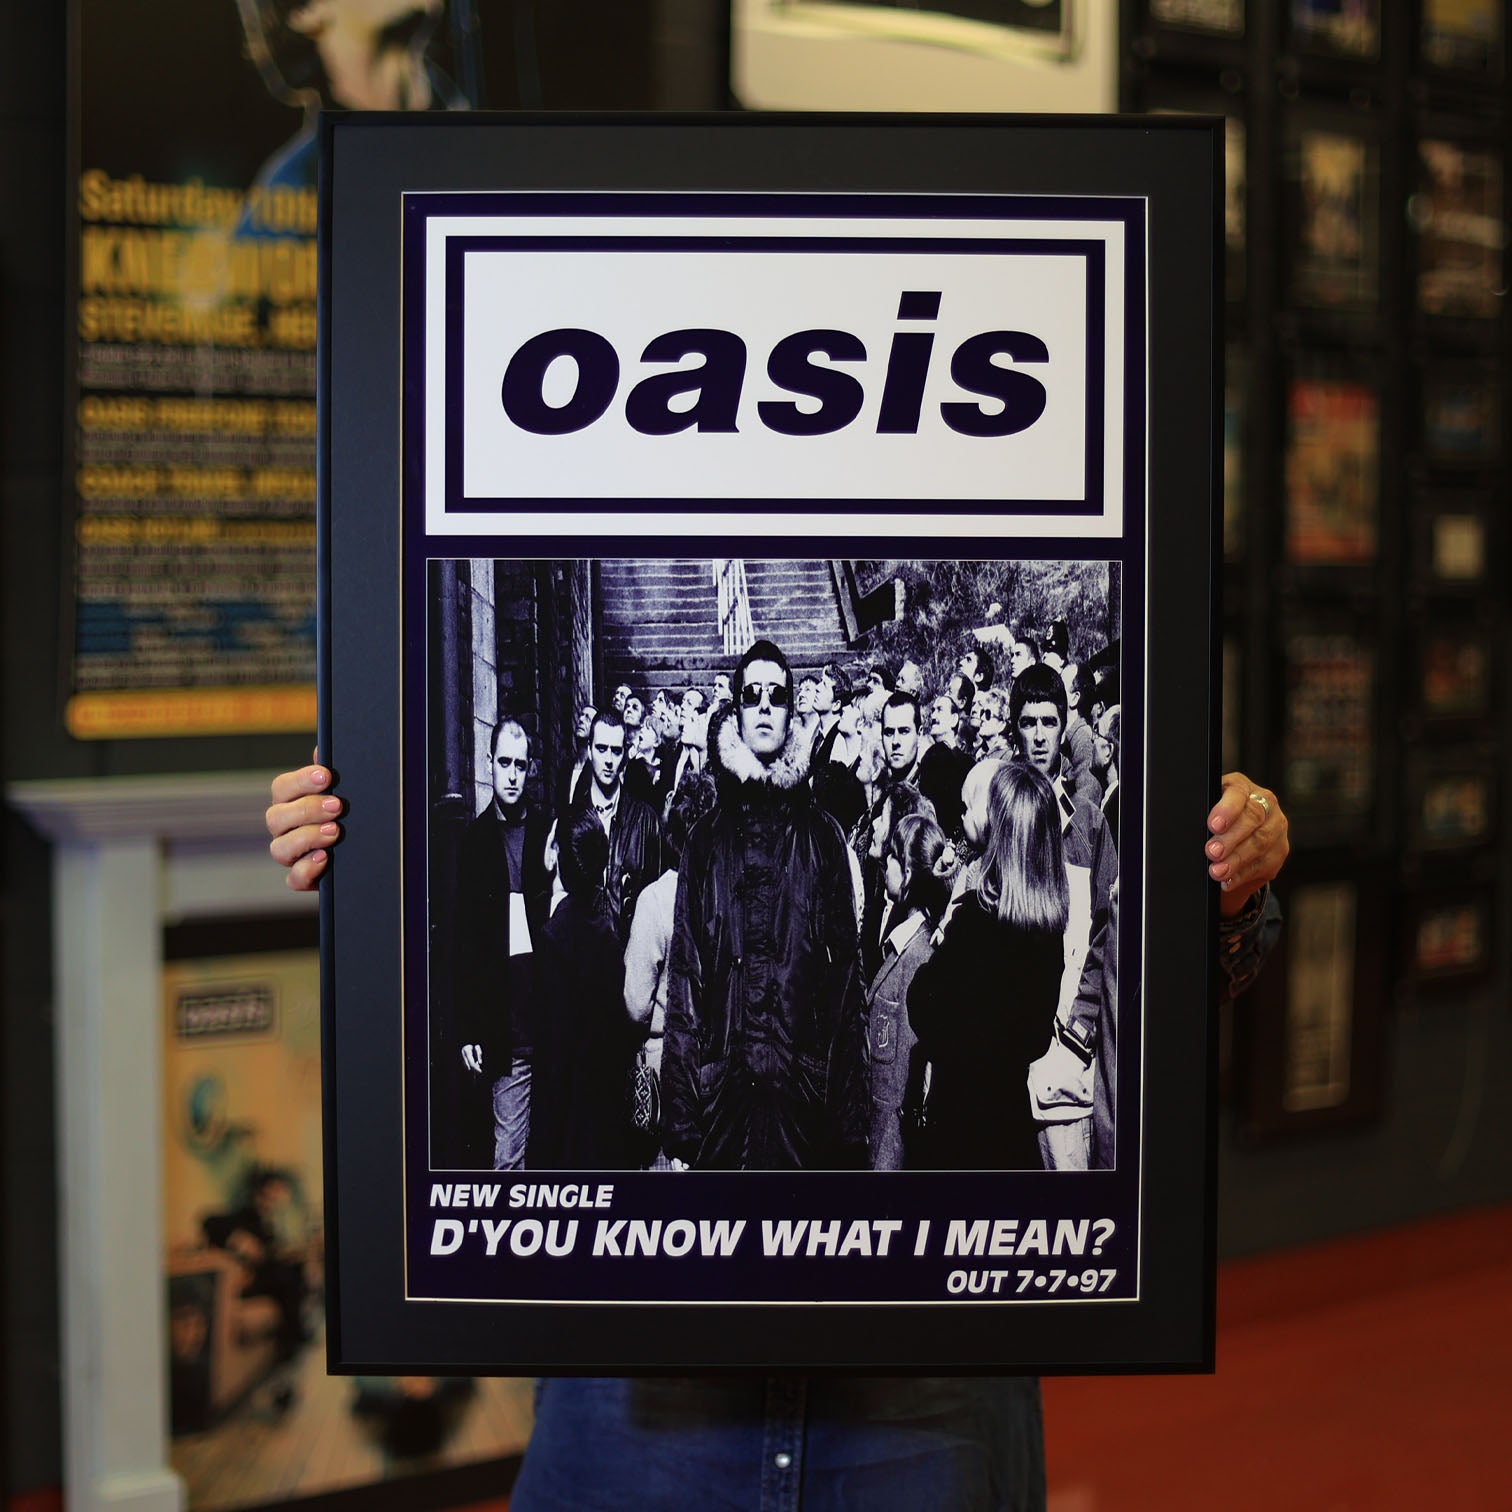 Oasis 'D'You Know What I Mean' 1997 Original Street Flyposter - New Item